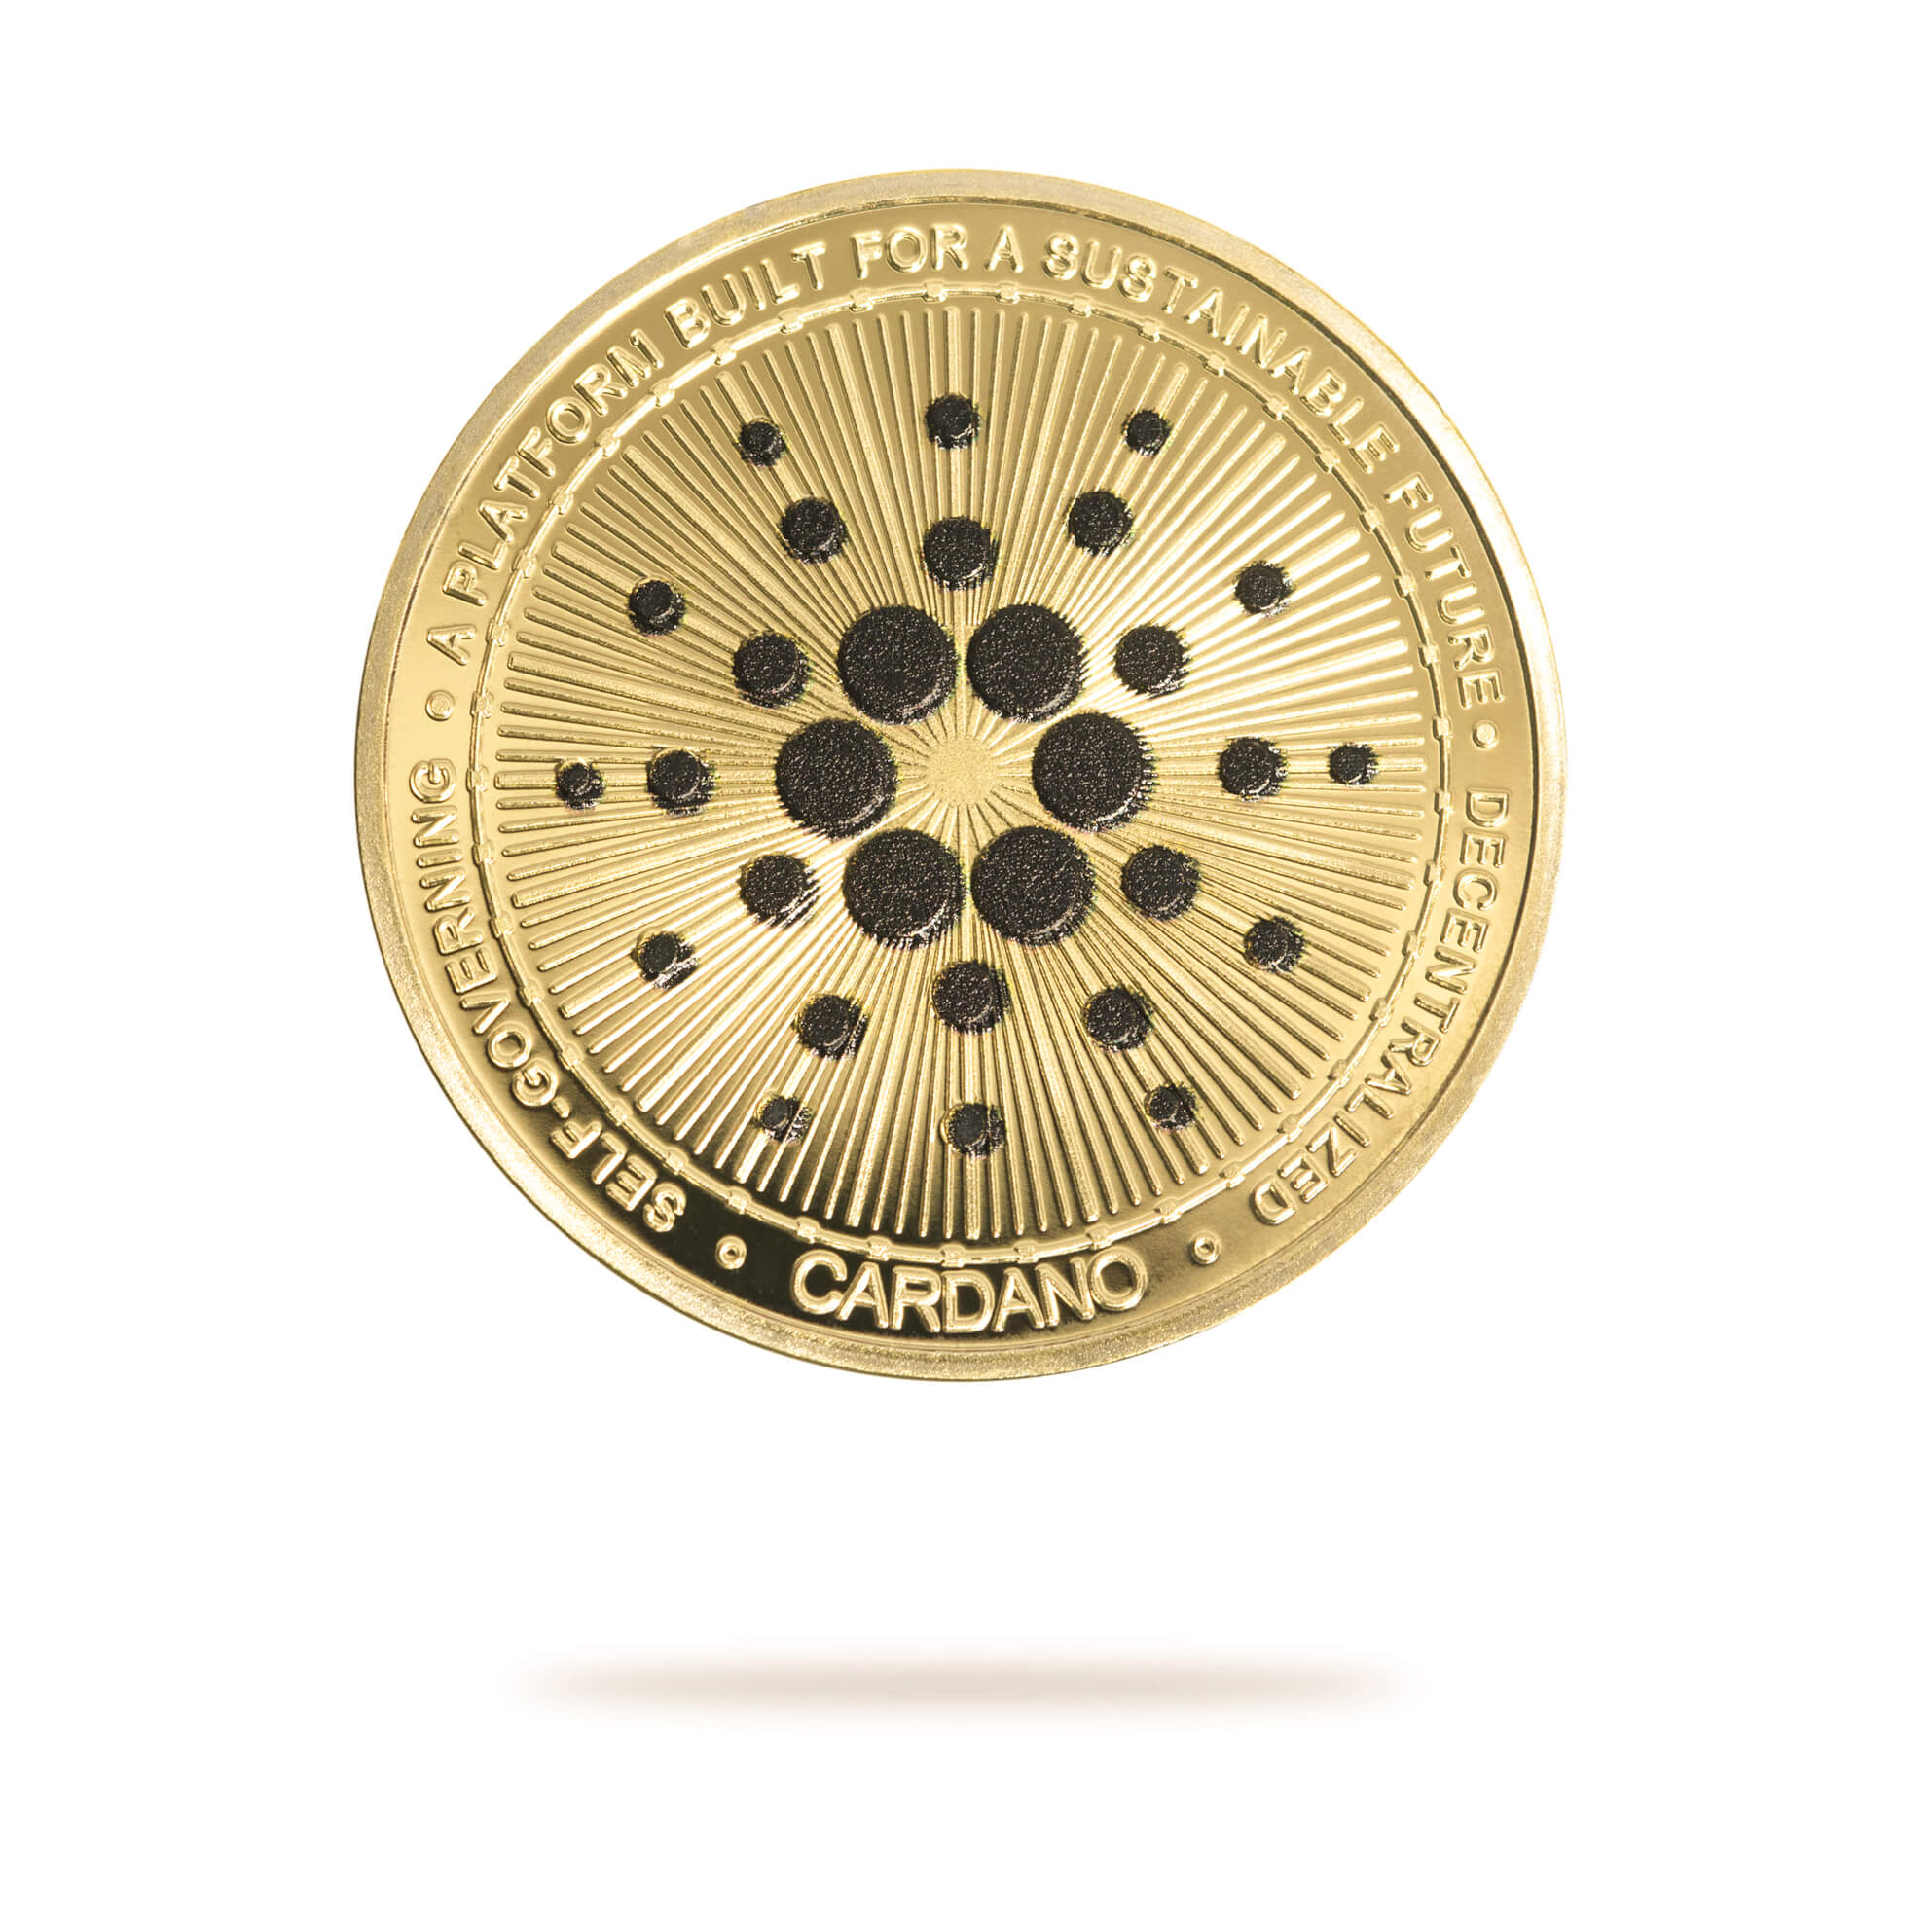 Cryptochips | Cardano Physical Crypto Coin. Collectable cryptocurrency merch you can hodl